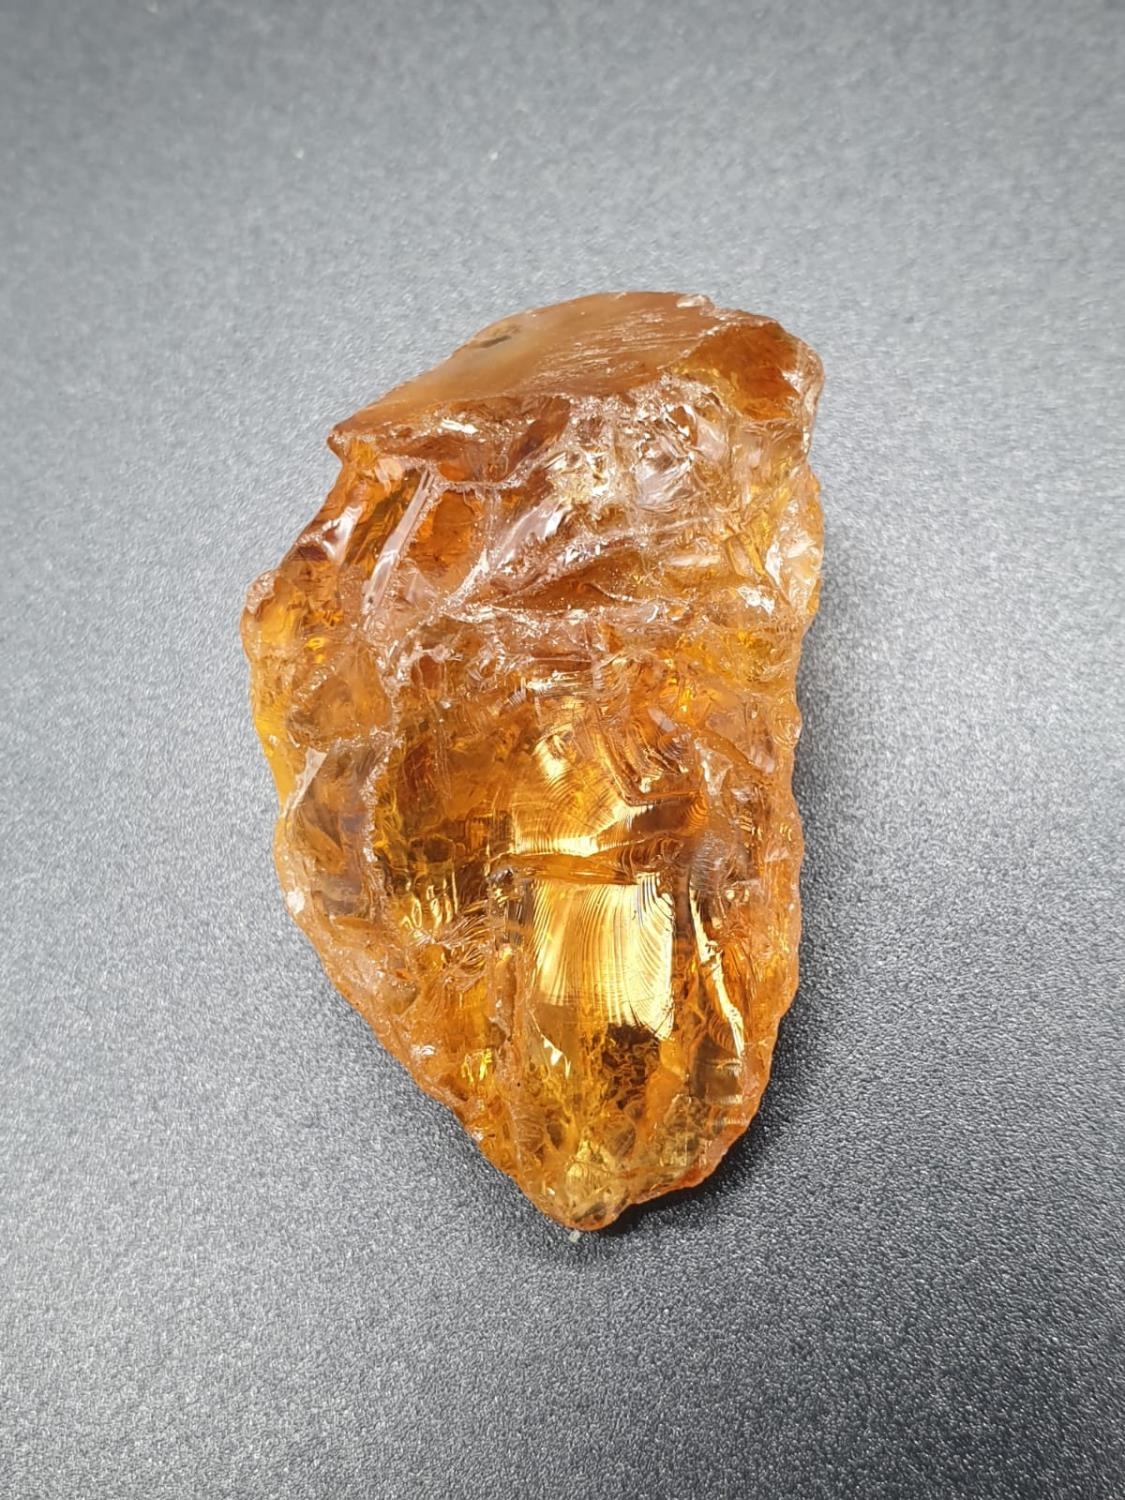 134.60 Ct Natural Citrine. Rough shape. ITLGR certified - Image 3 of 4